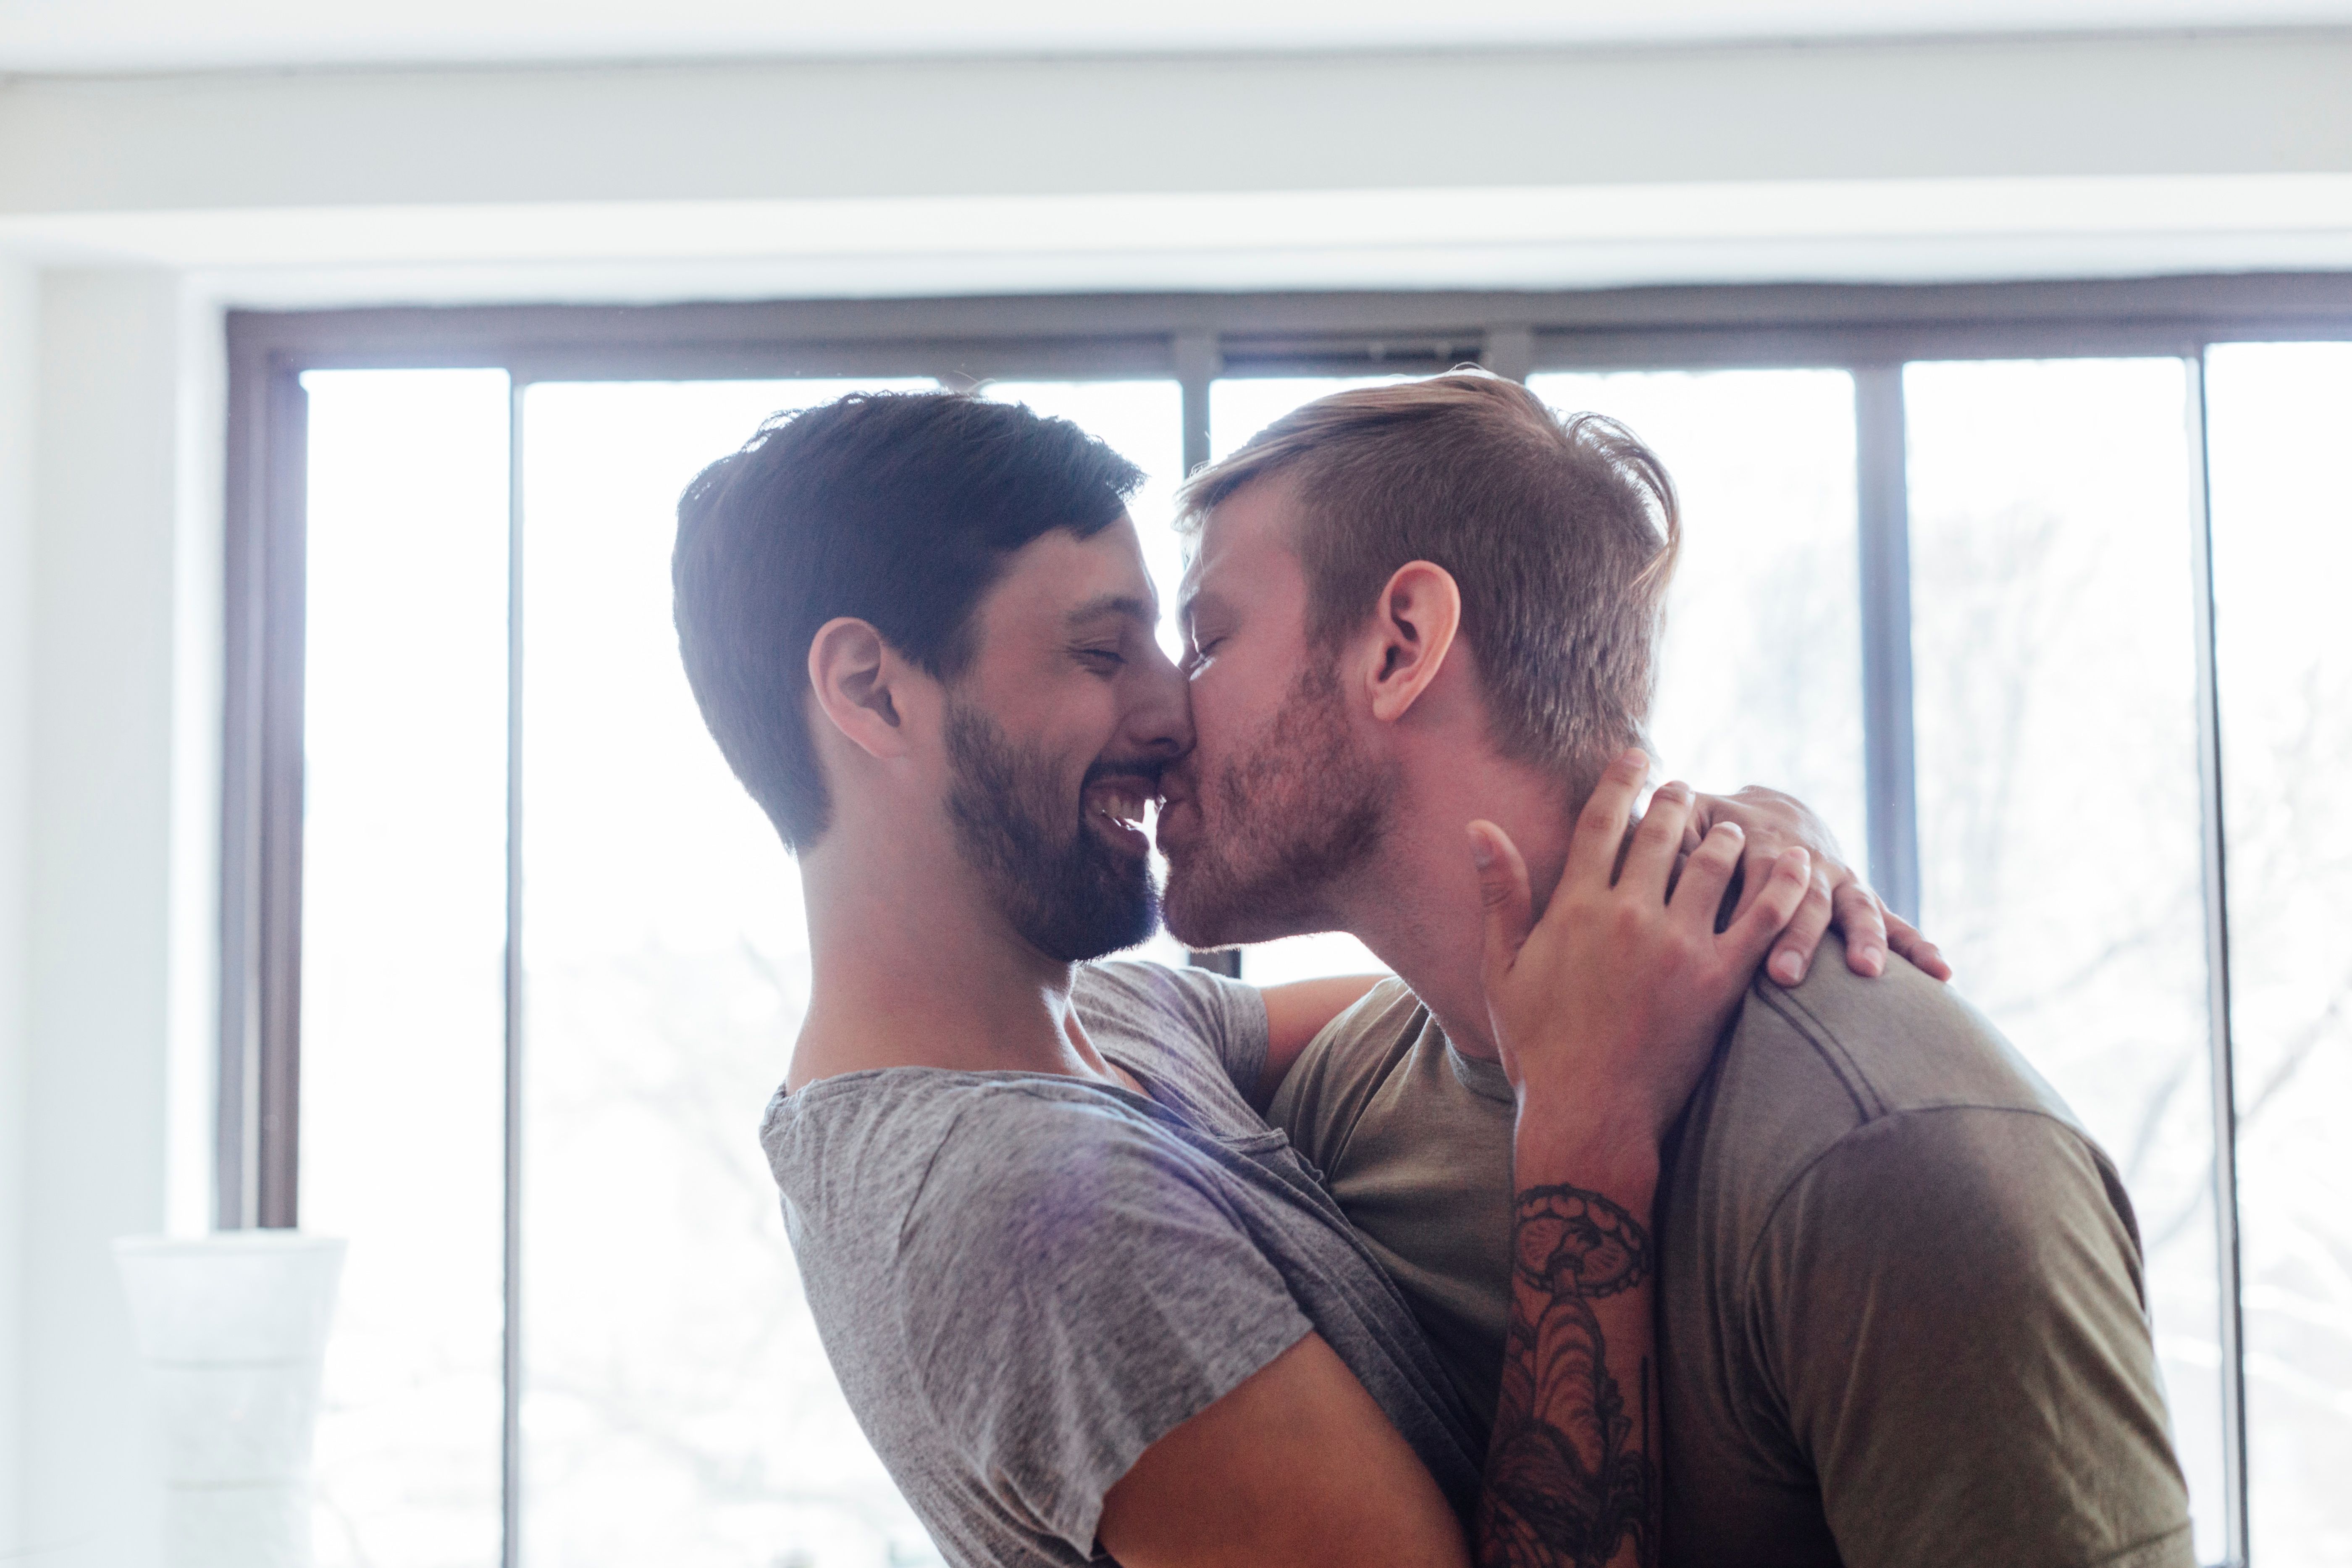 8 Expert Tips for Bicurious Guys Ready to Explore Their Sexuality pic